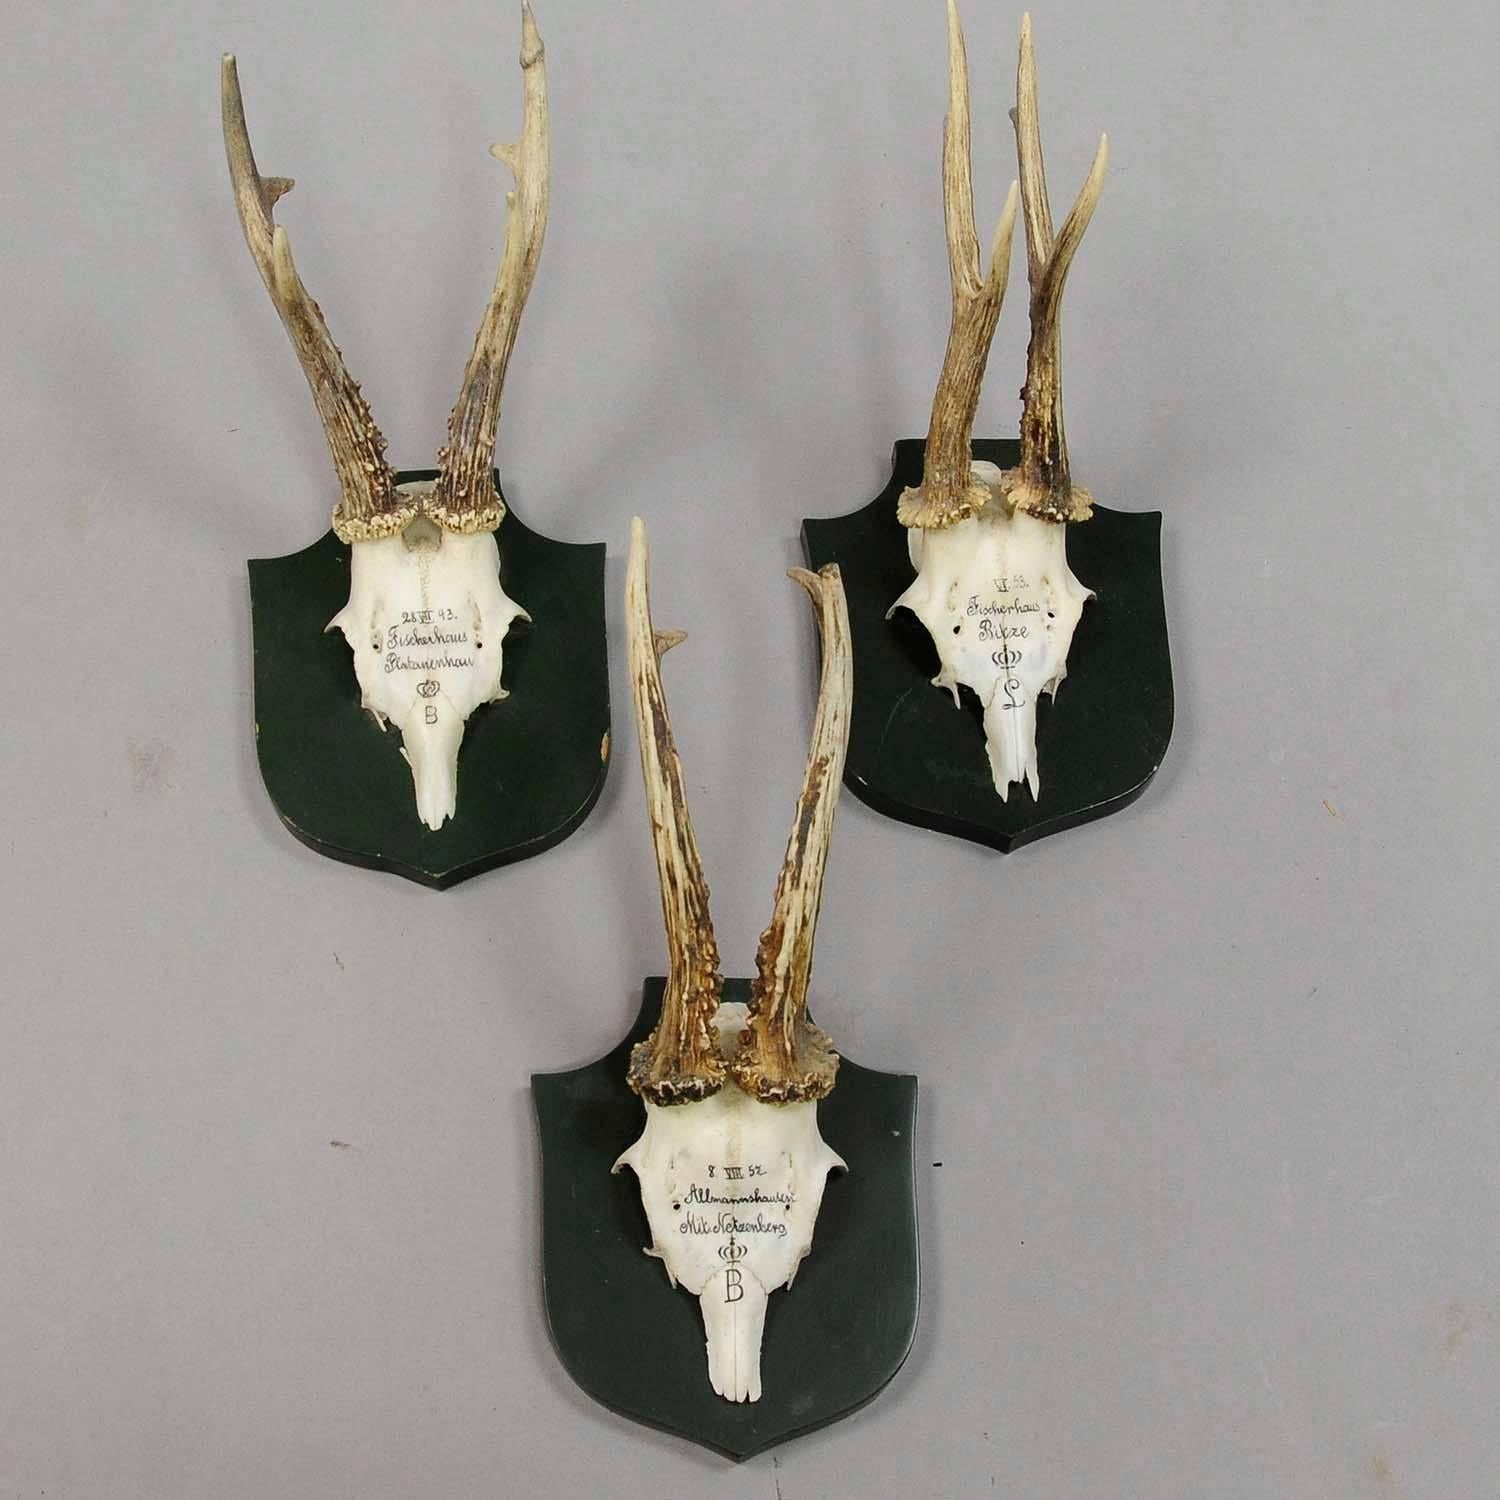 Rustic Six Deer Trophies on Plaques from Palace Salem, Germany